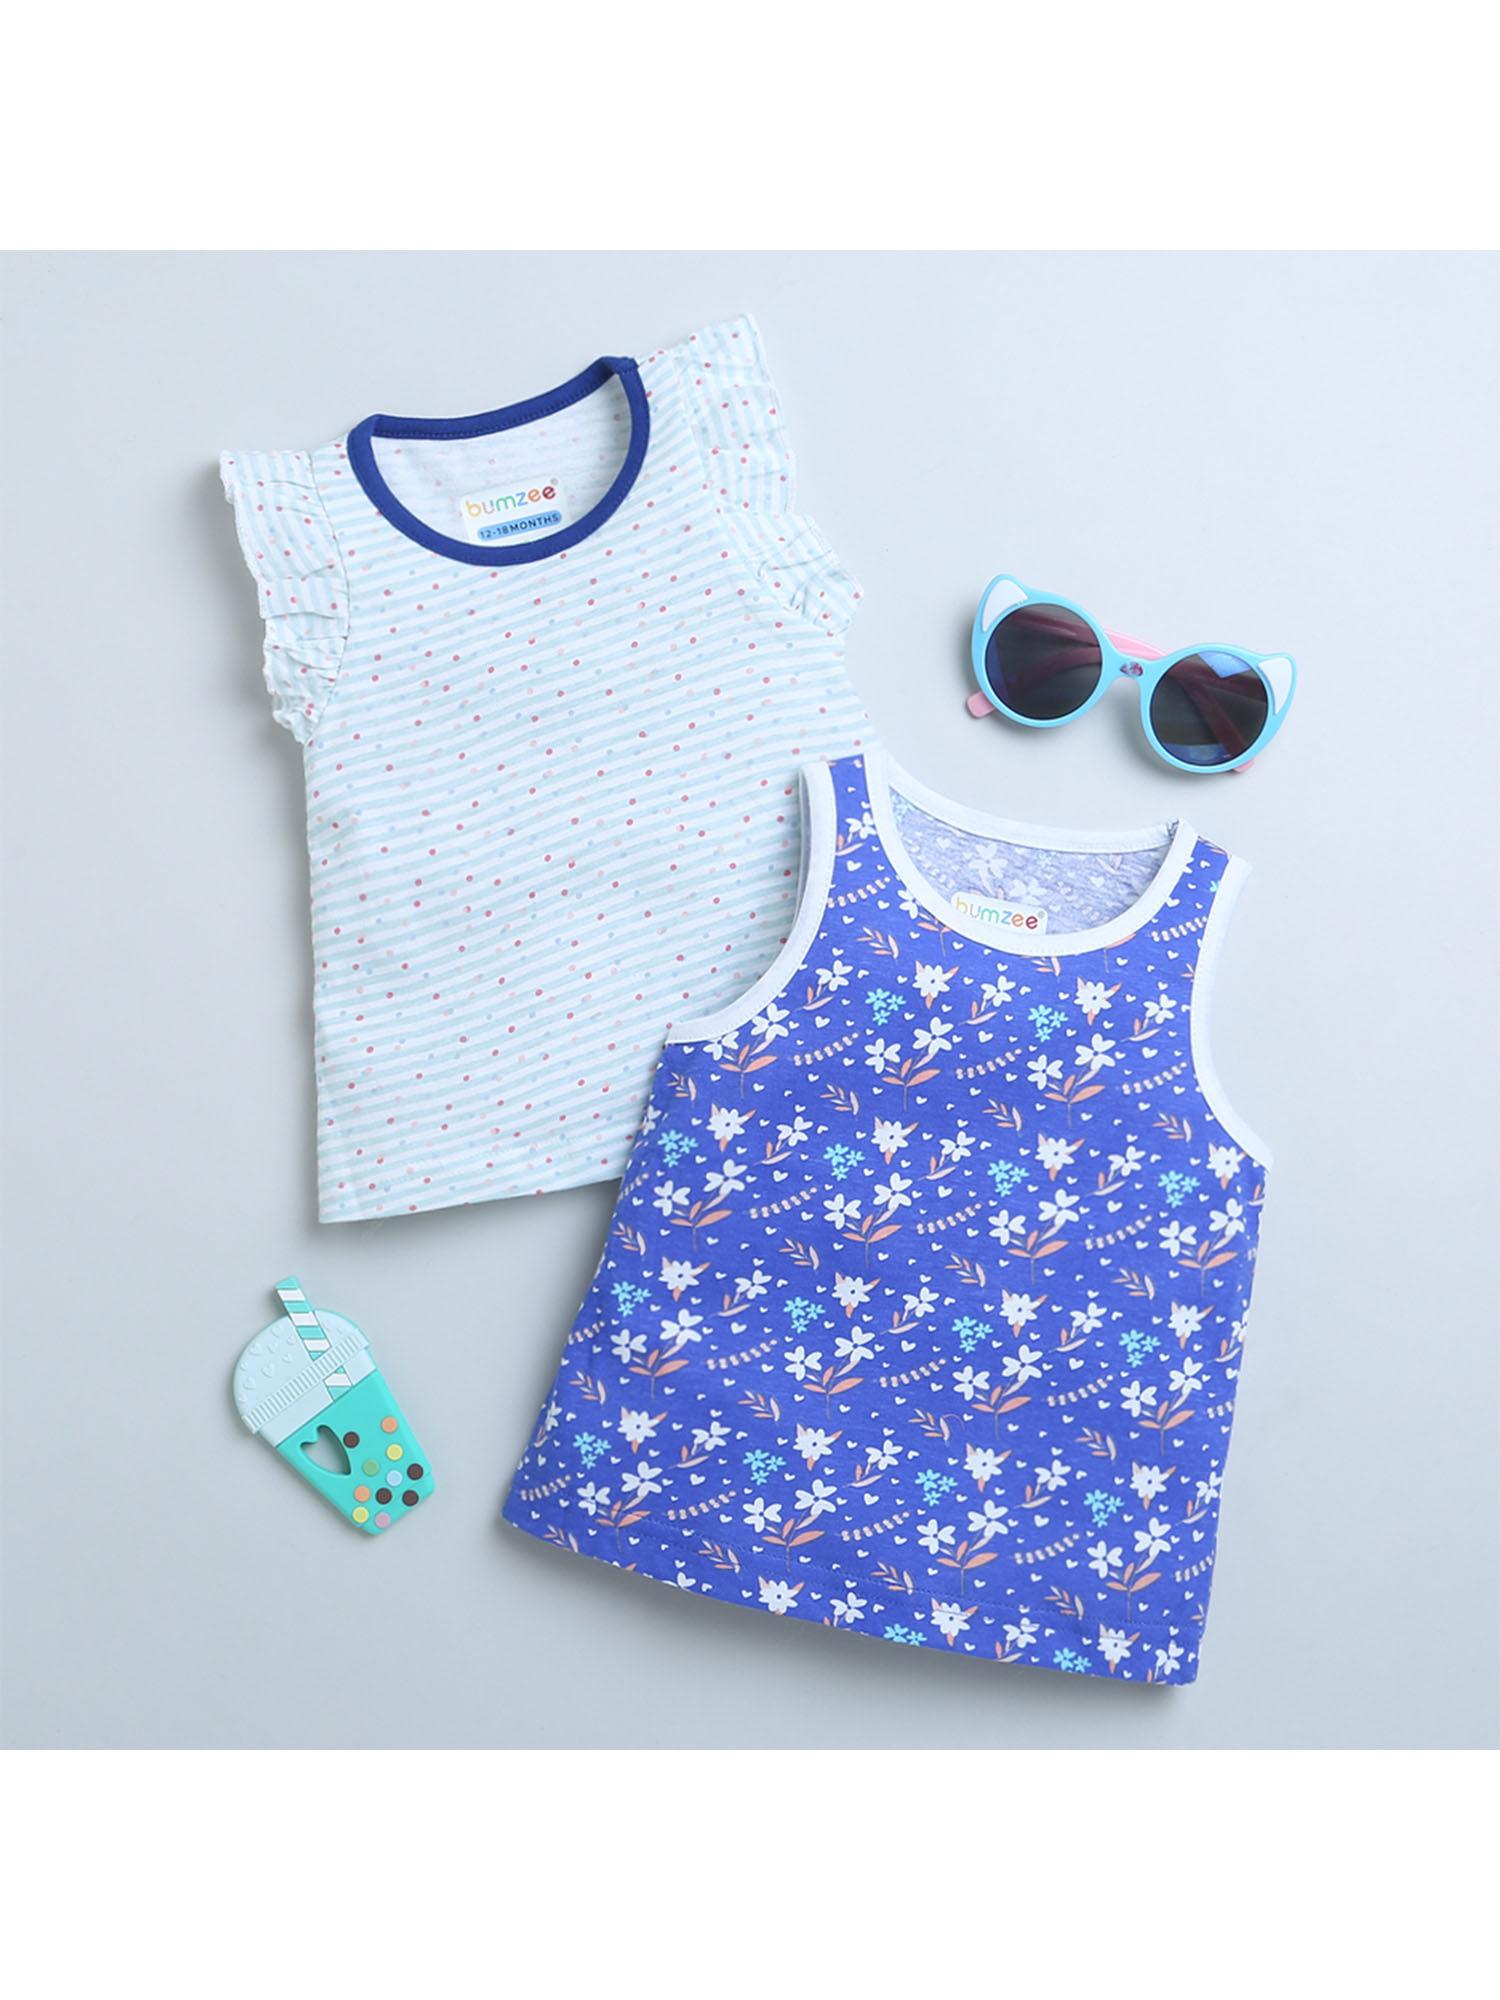 royal blue and white girls sleeveless top and tank top (set of 2)